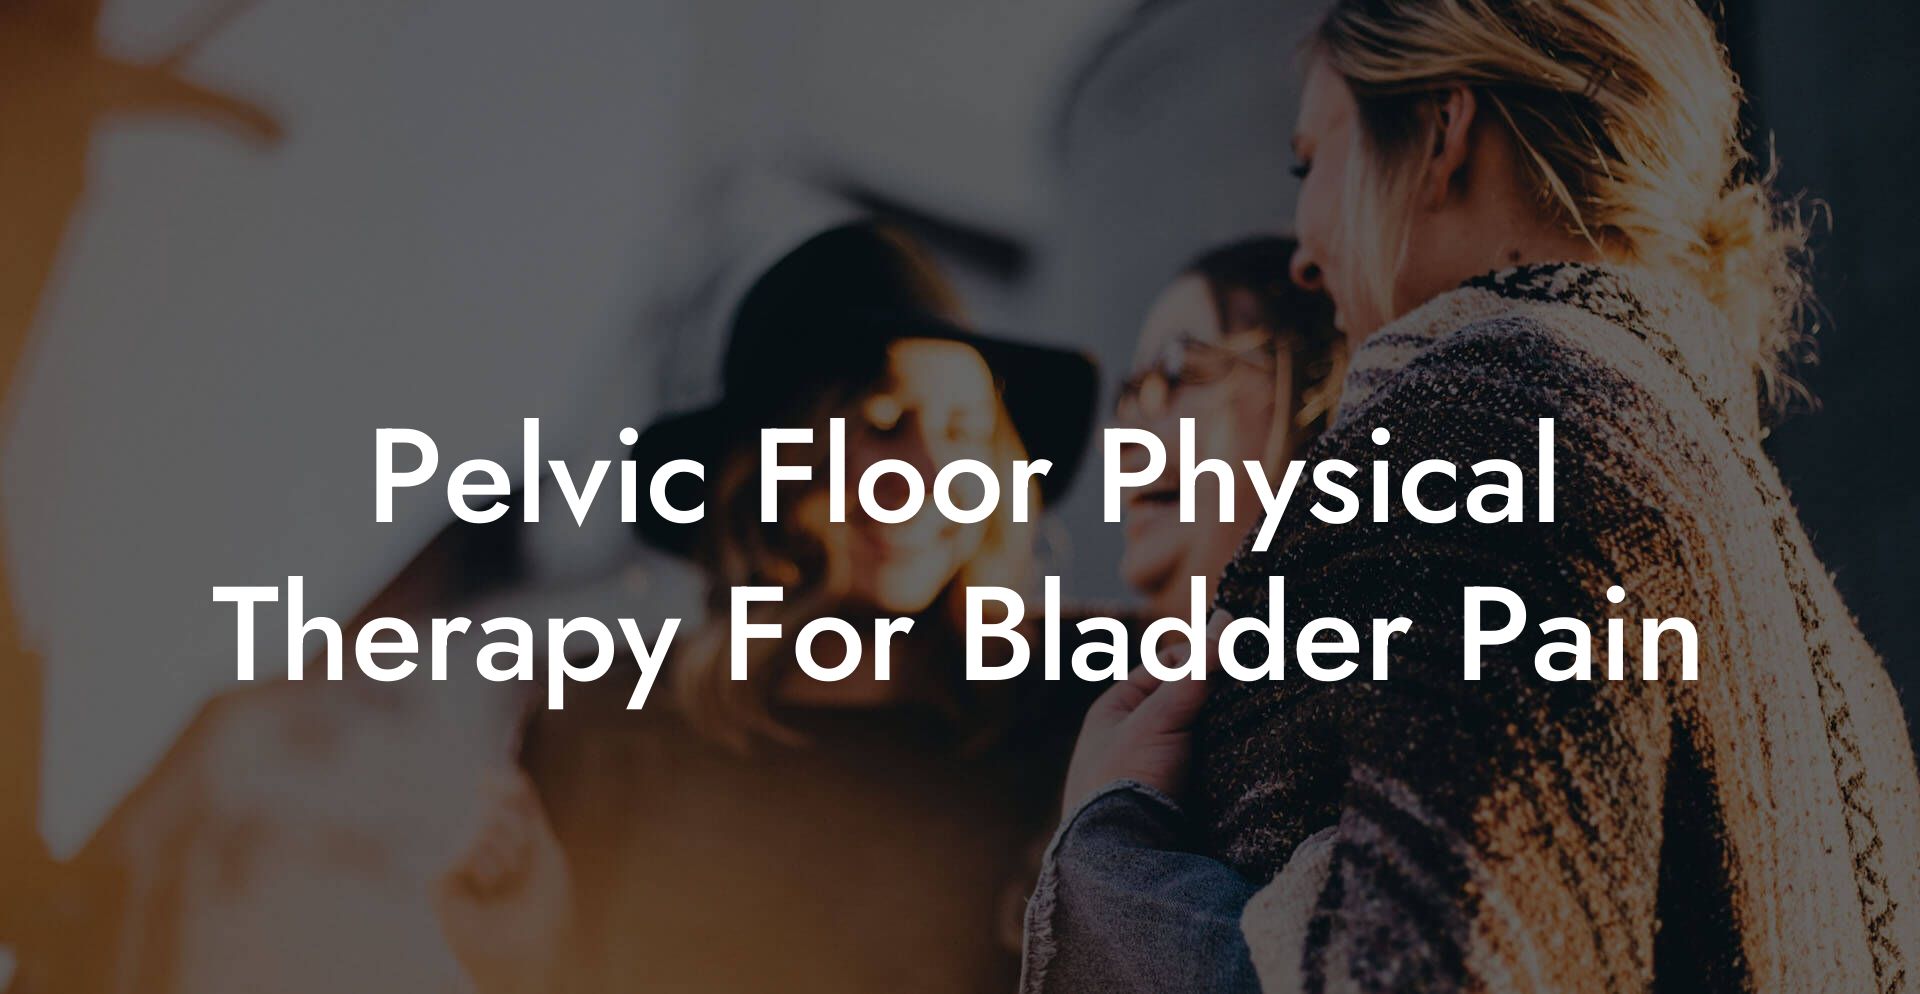 Pelvic Floor Physical Therapy For Bladder Pain